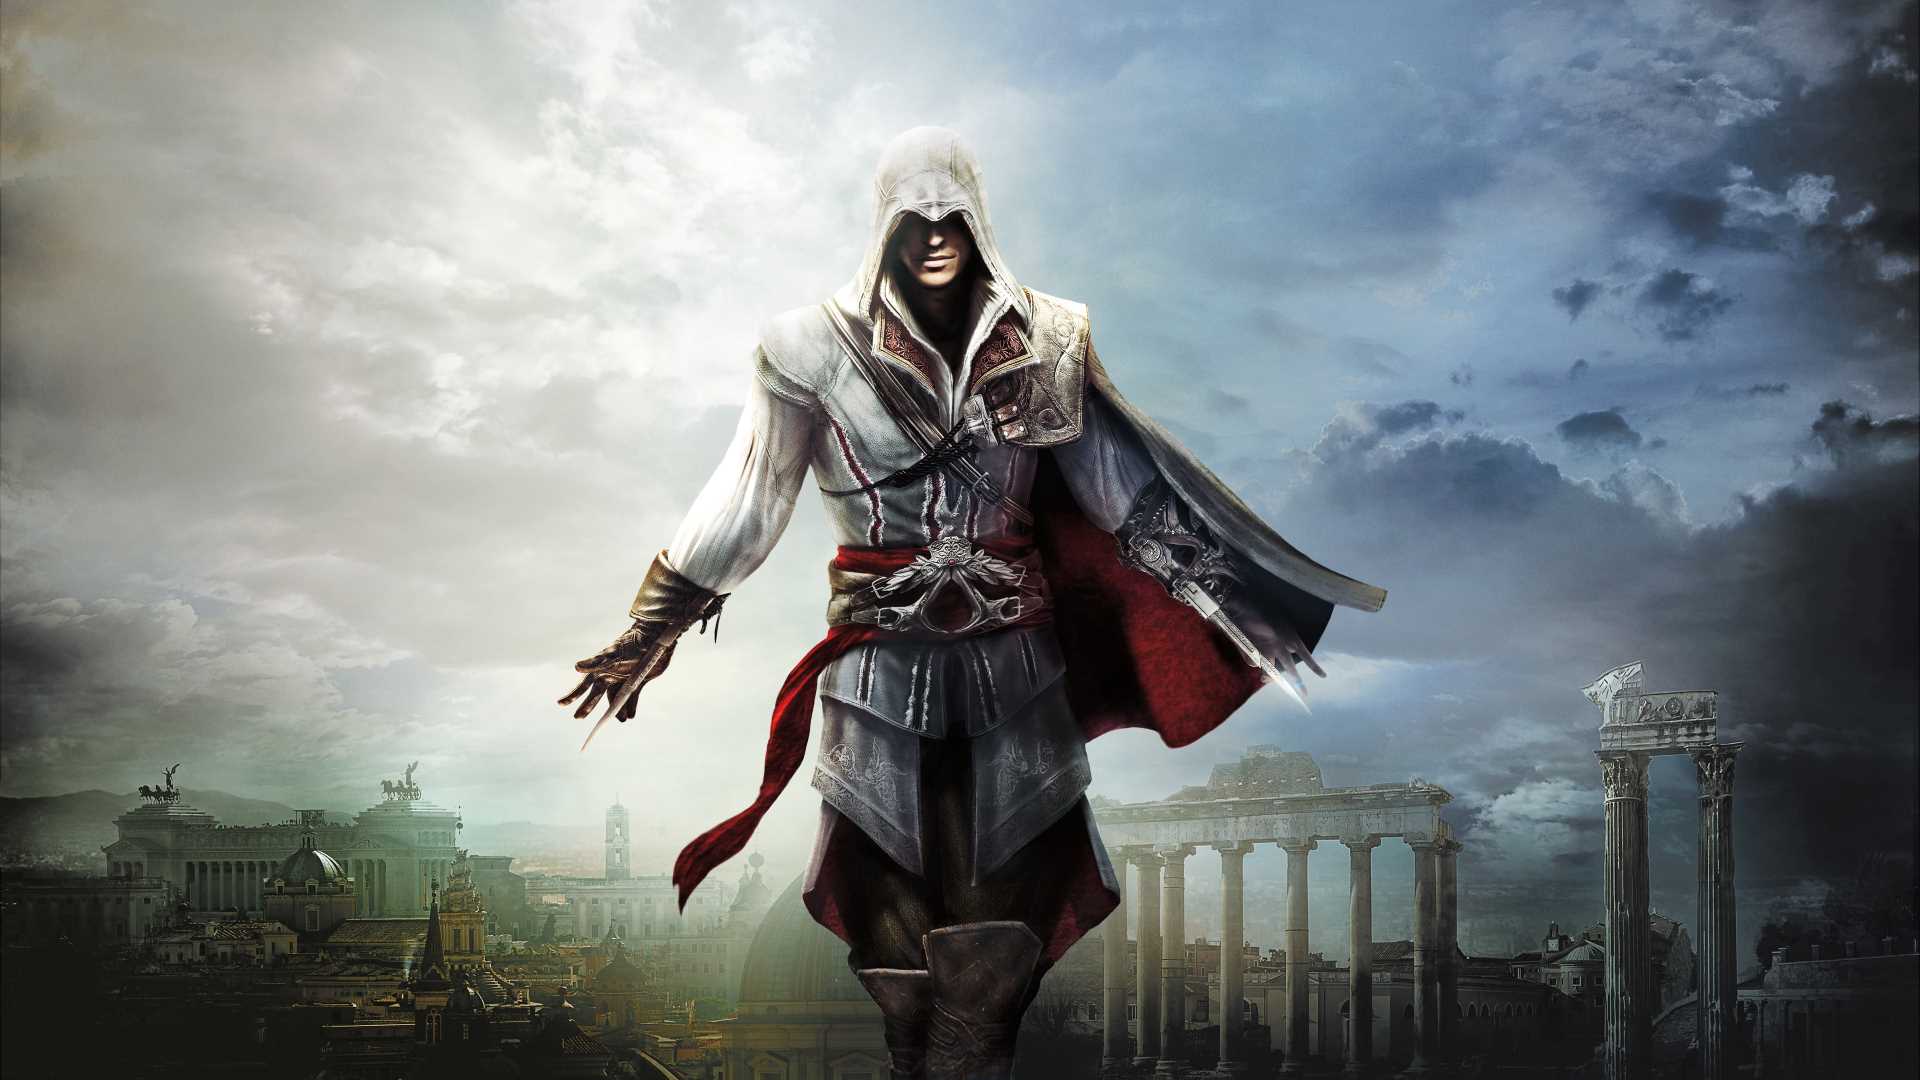 Is Assassin's Creed Mirage on Xbox Game Pass? - Dot Esports